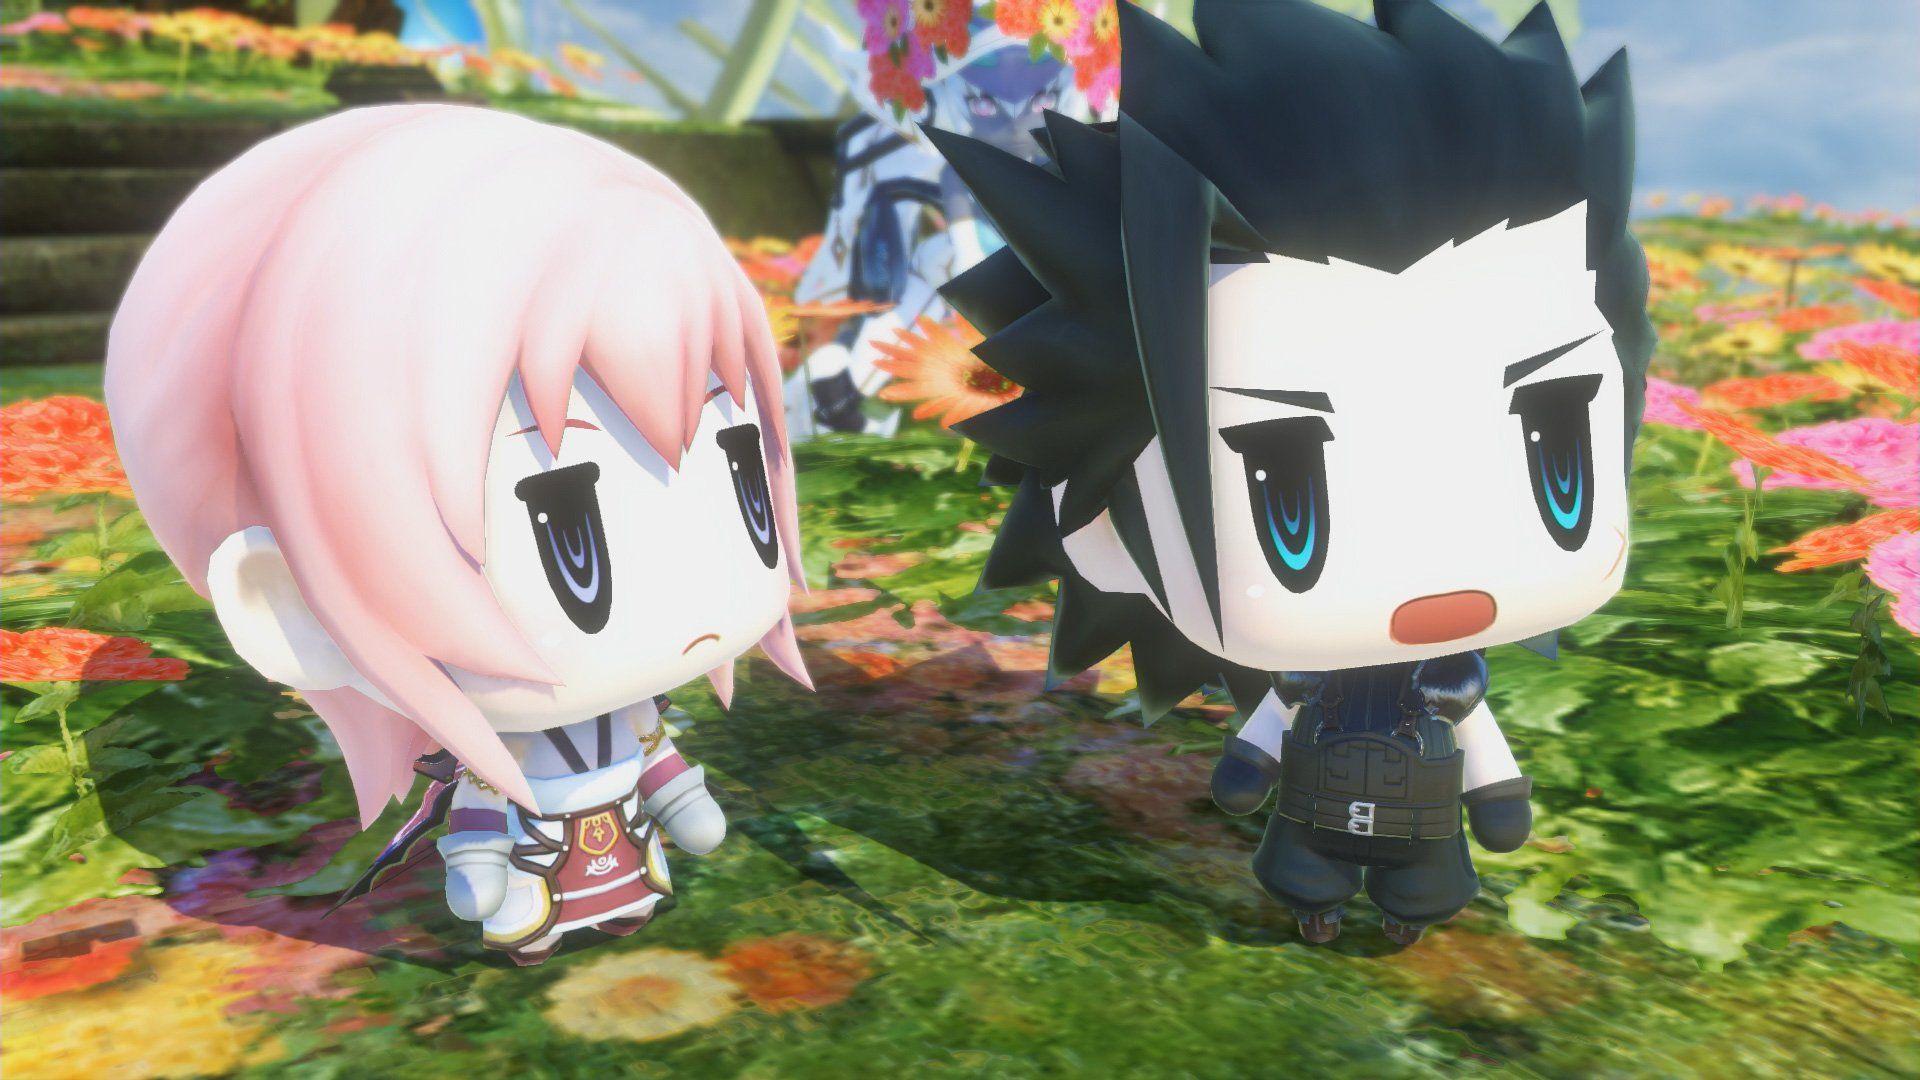 Here's a better look at World of Final Fantasy Maxima